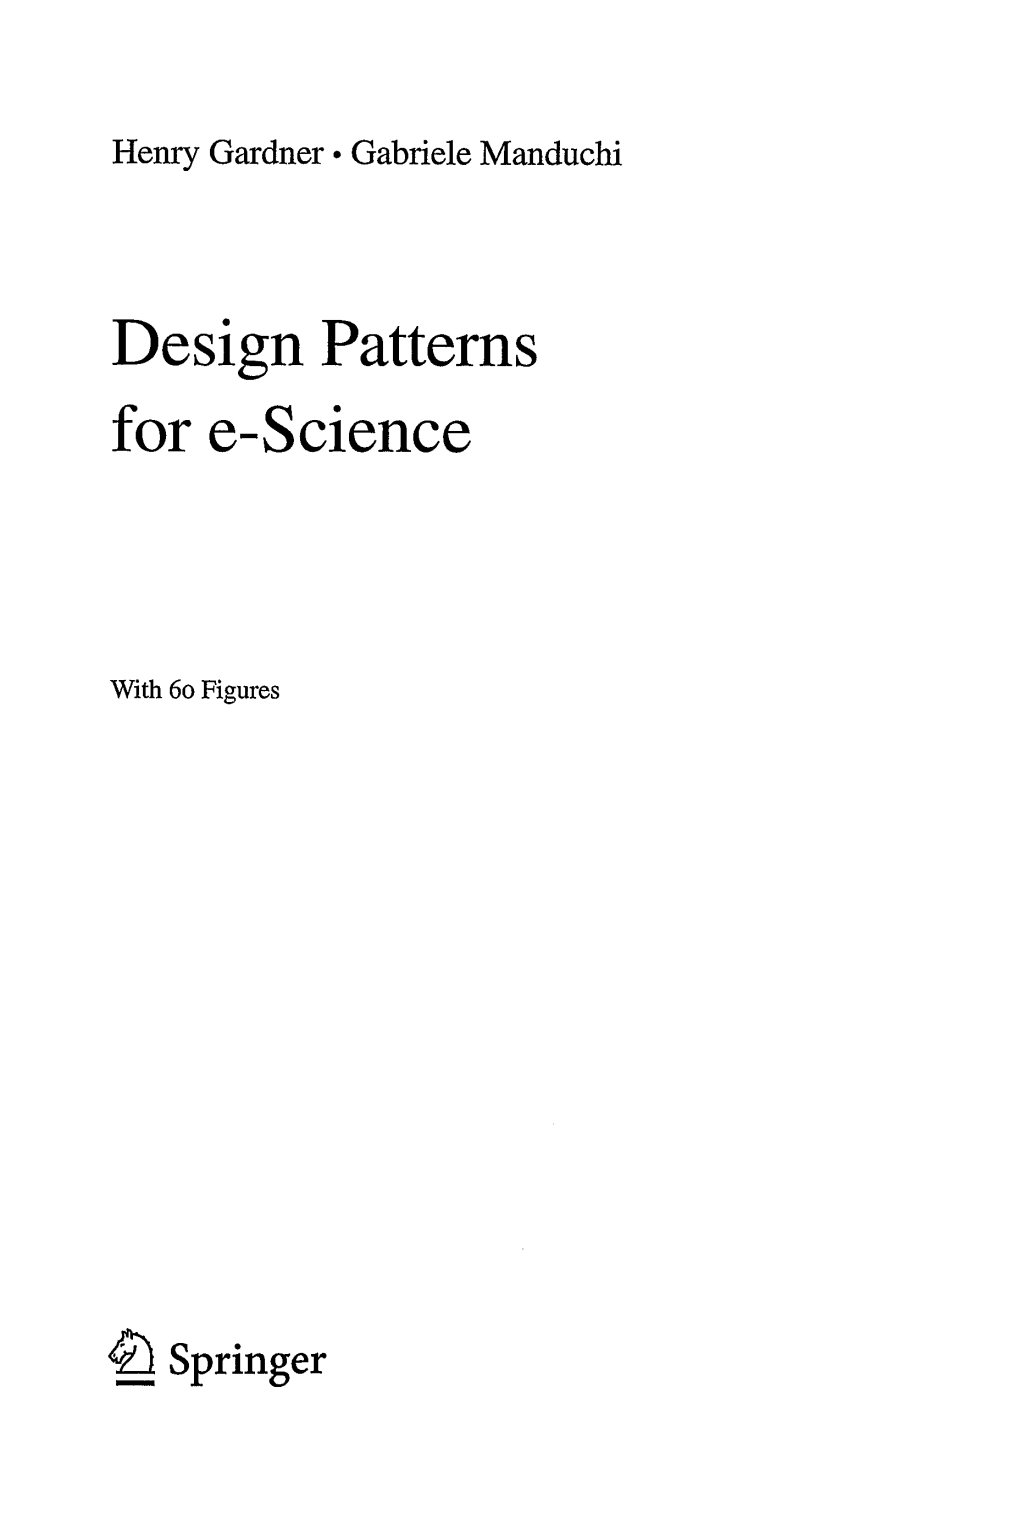 Design Patterns for E-Science